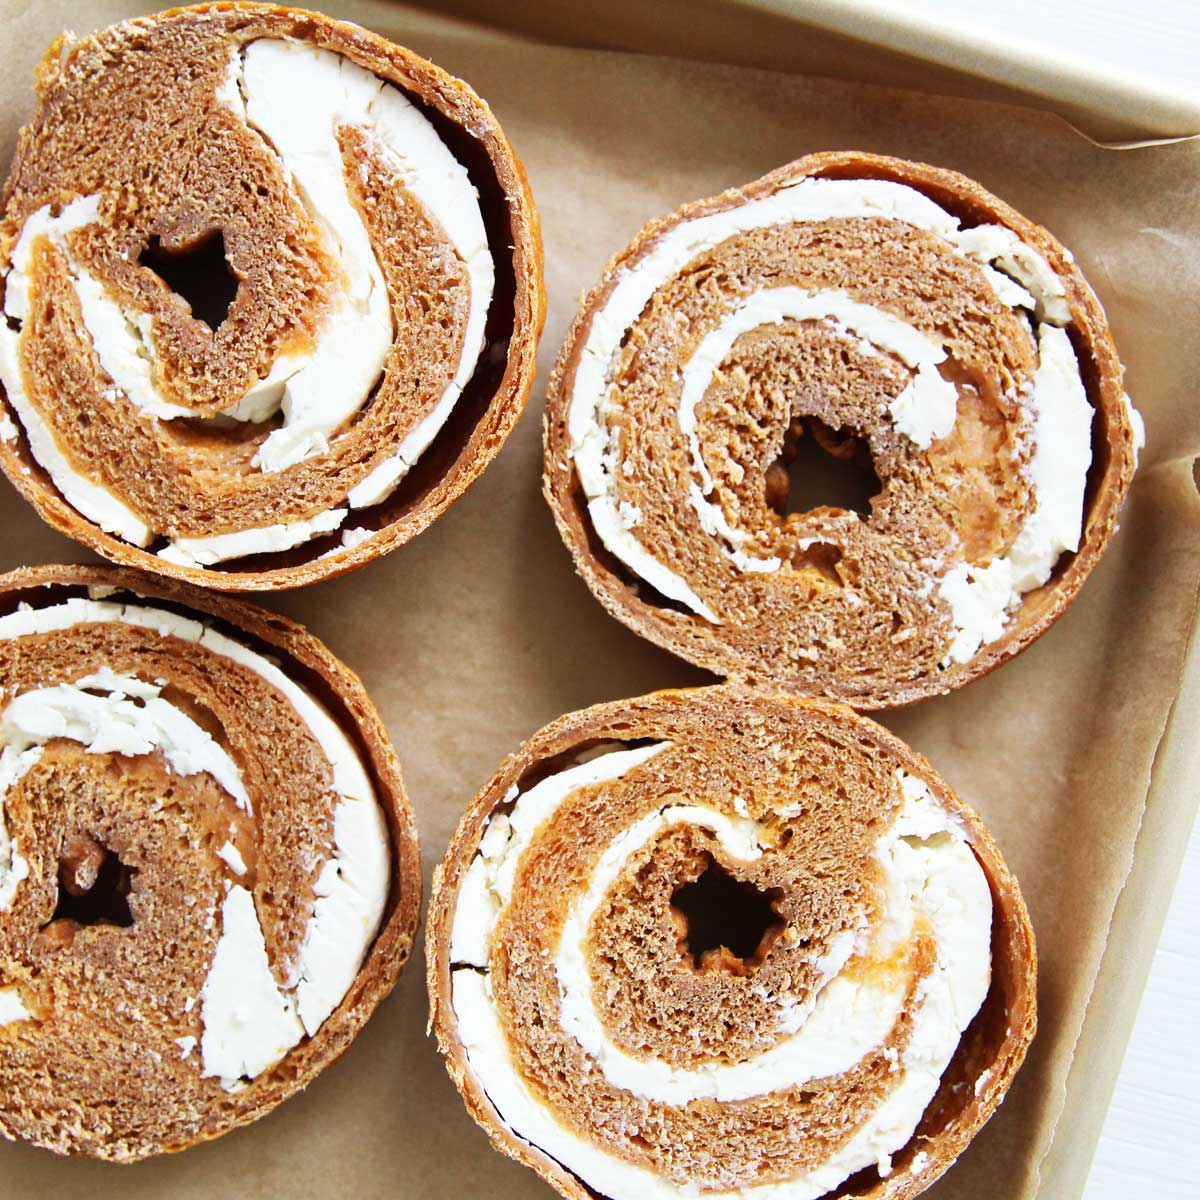 Healthy Pumpkin Bagels Stuffed with Cream Cheese (with Step-by-Step Photos) - Peanut Butter Banana Bread